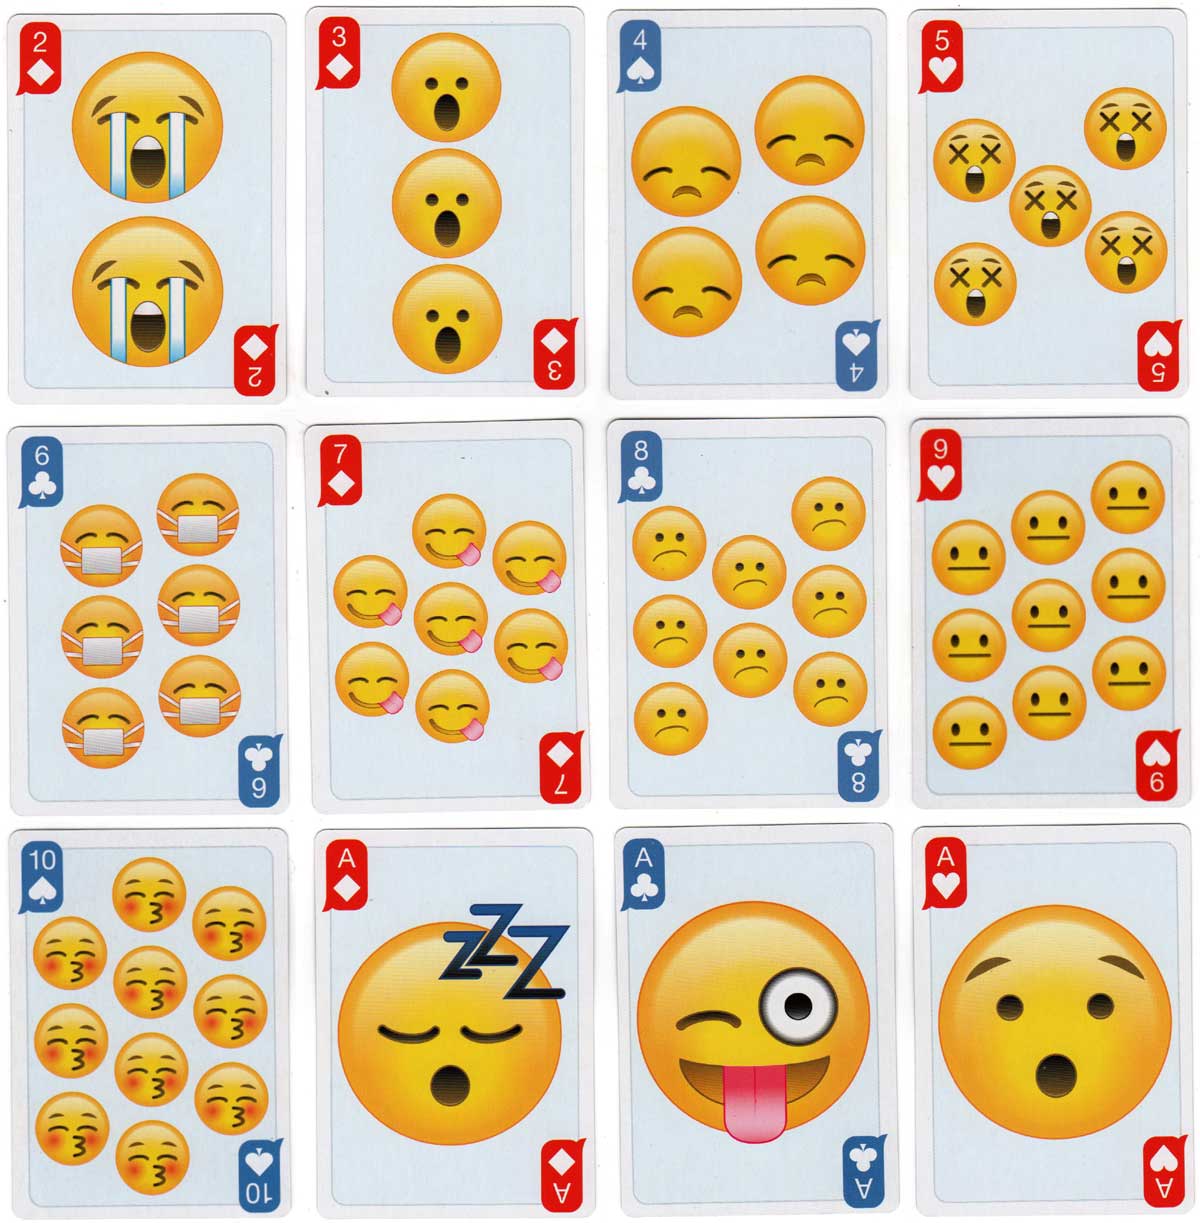 Emoticon playing cards designed by Buy Design Studios, 2016